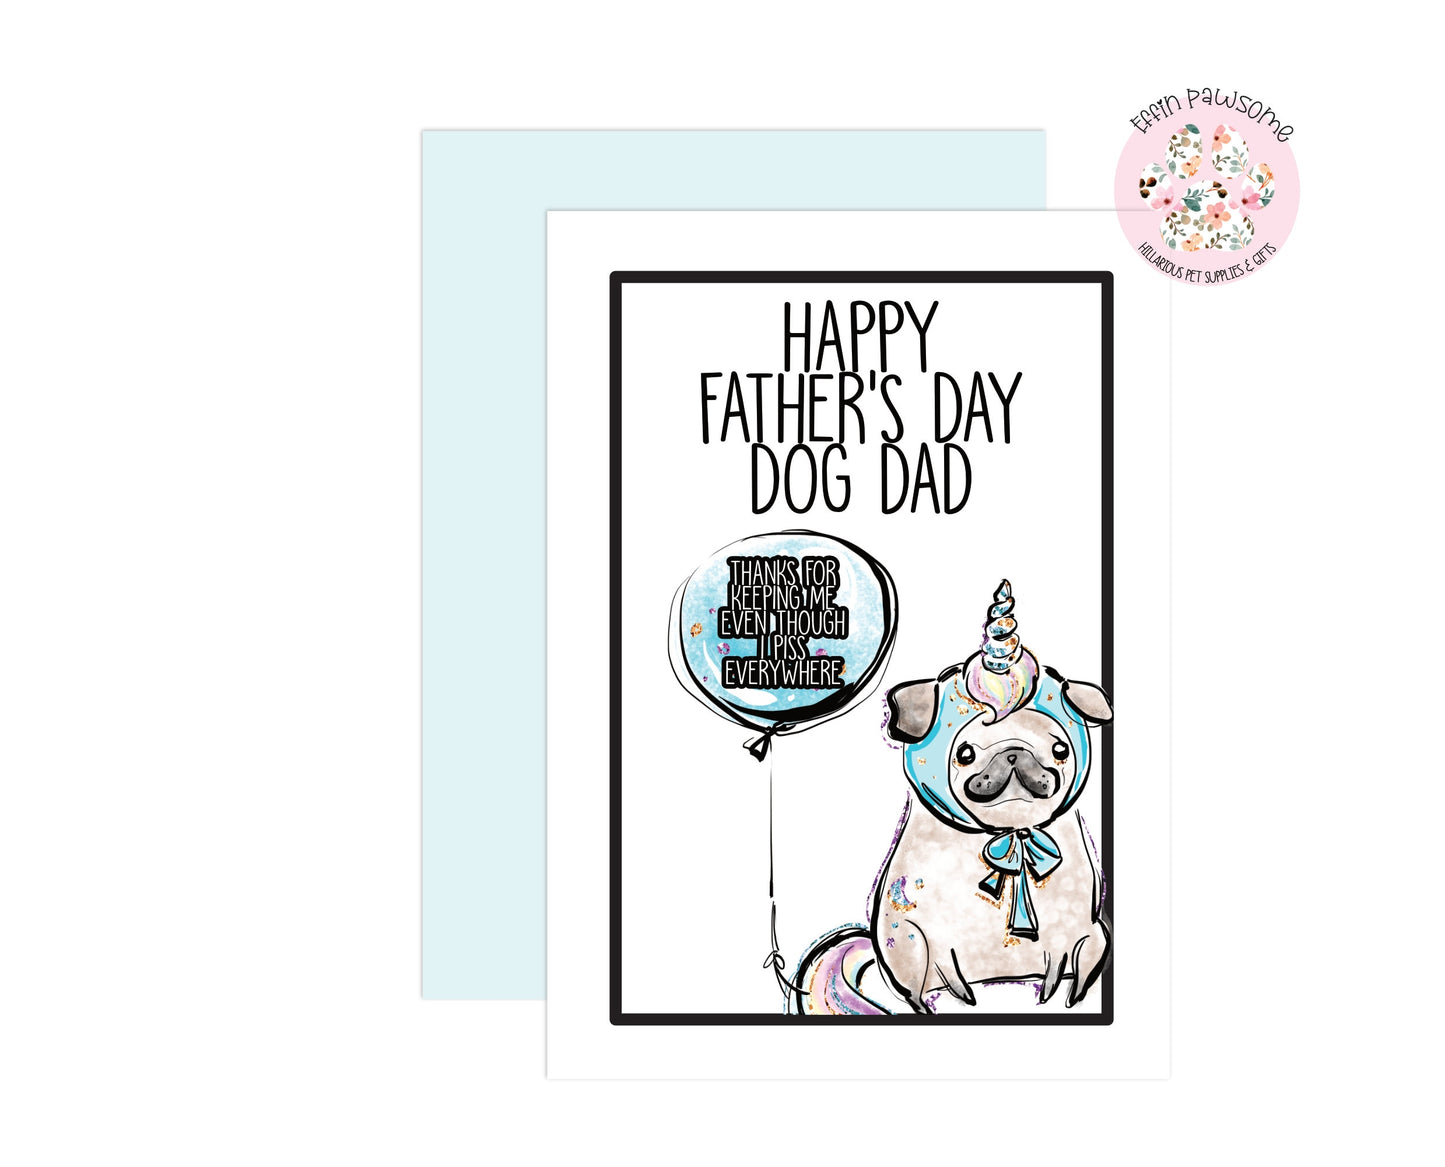 Piss Everywhere Pug Card | Personalised Gift | Dog Dad | Mother's Day Card | Pet Gift | Mum | Rude Card | Greetings Card | Mature | Dad Card